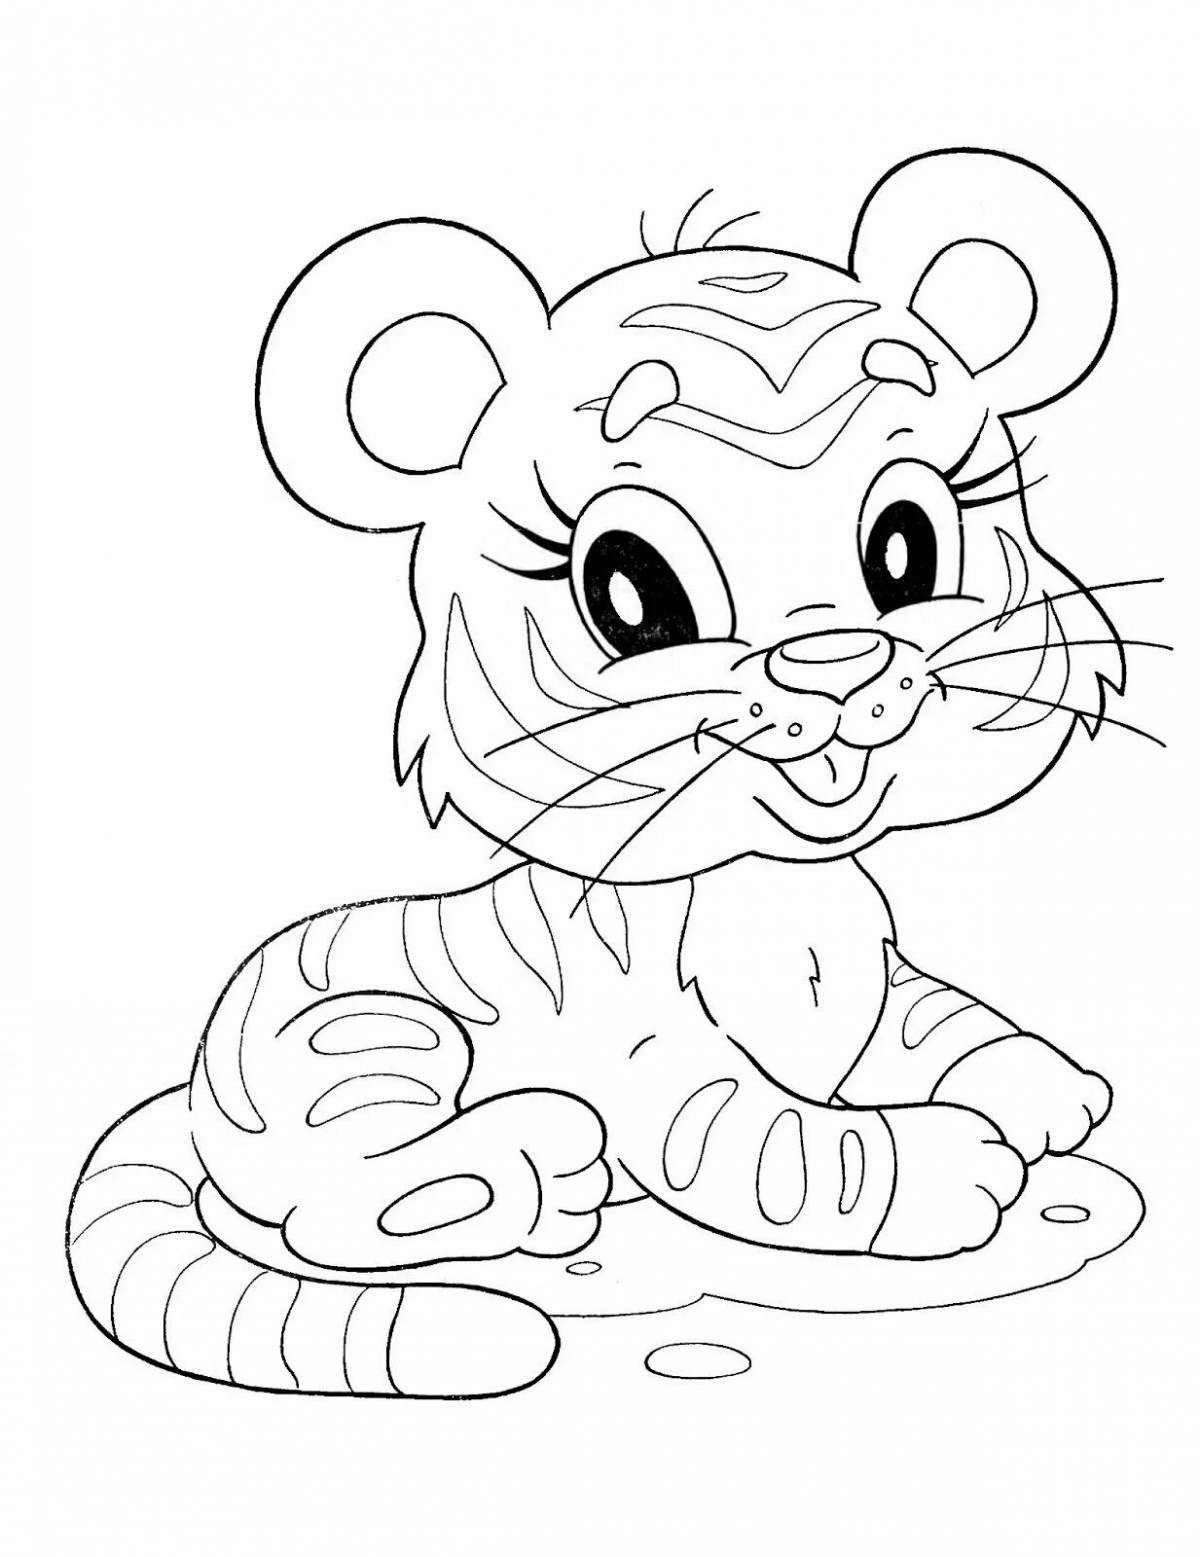 Animated tiger cub coloring page